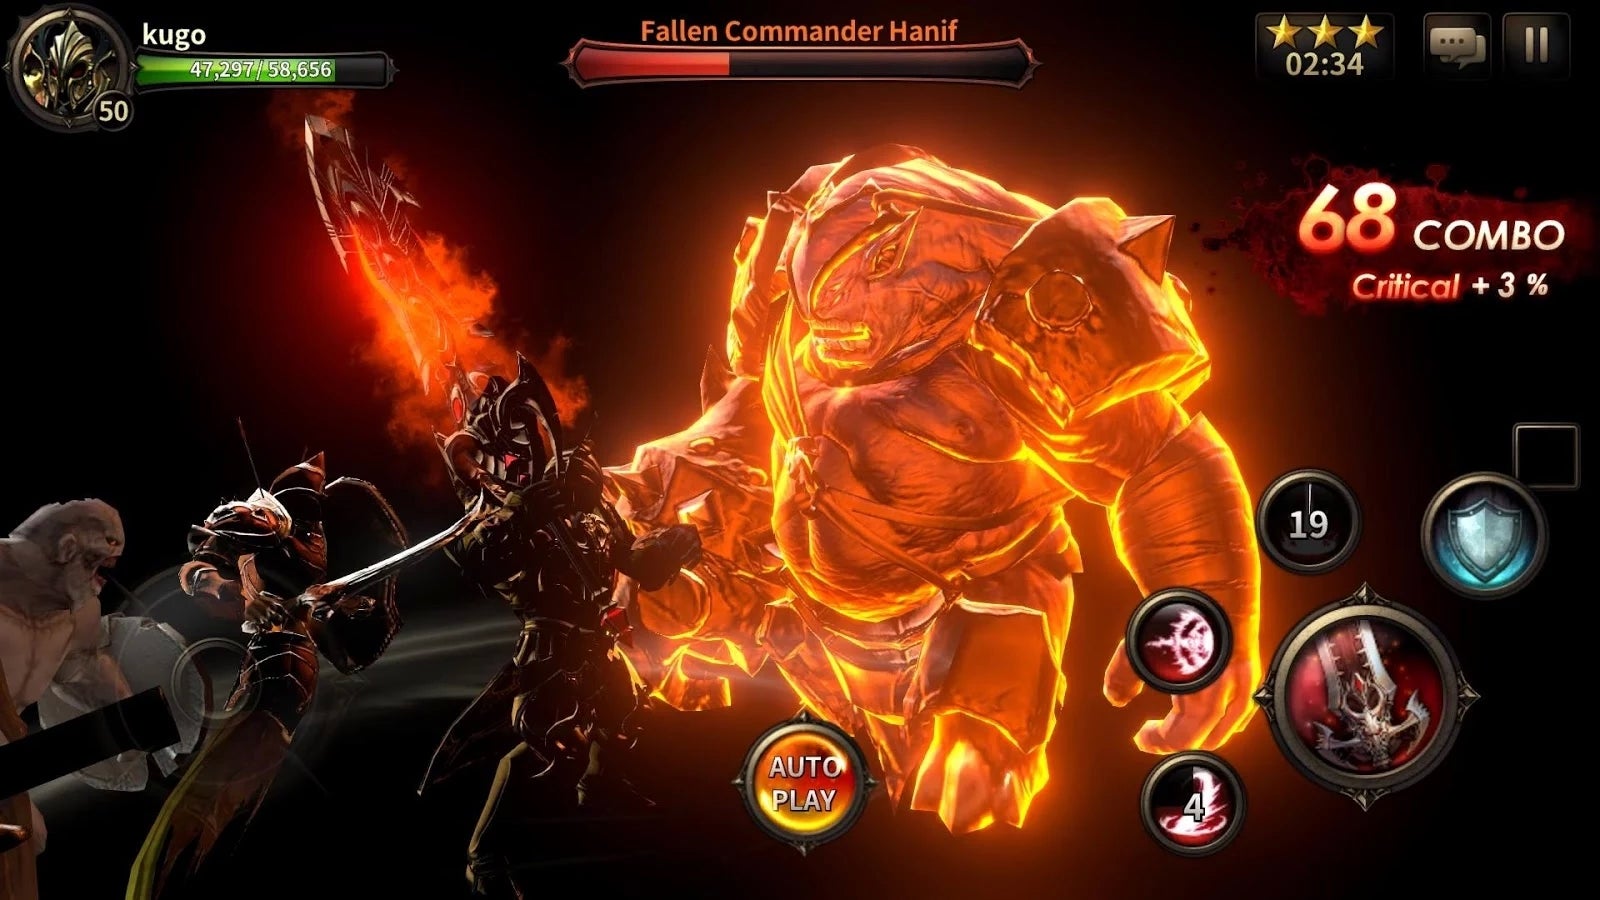 In the heat of battle - Heroes of Incredible Tales is a mighty Unreal Engine-powered action RPG out now on Android and iOS